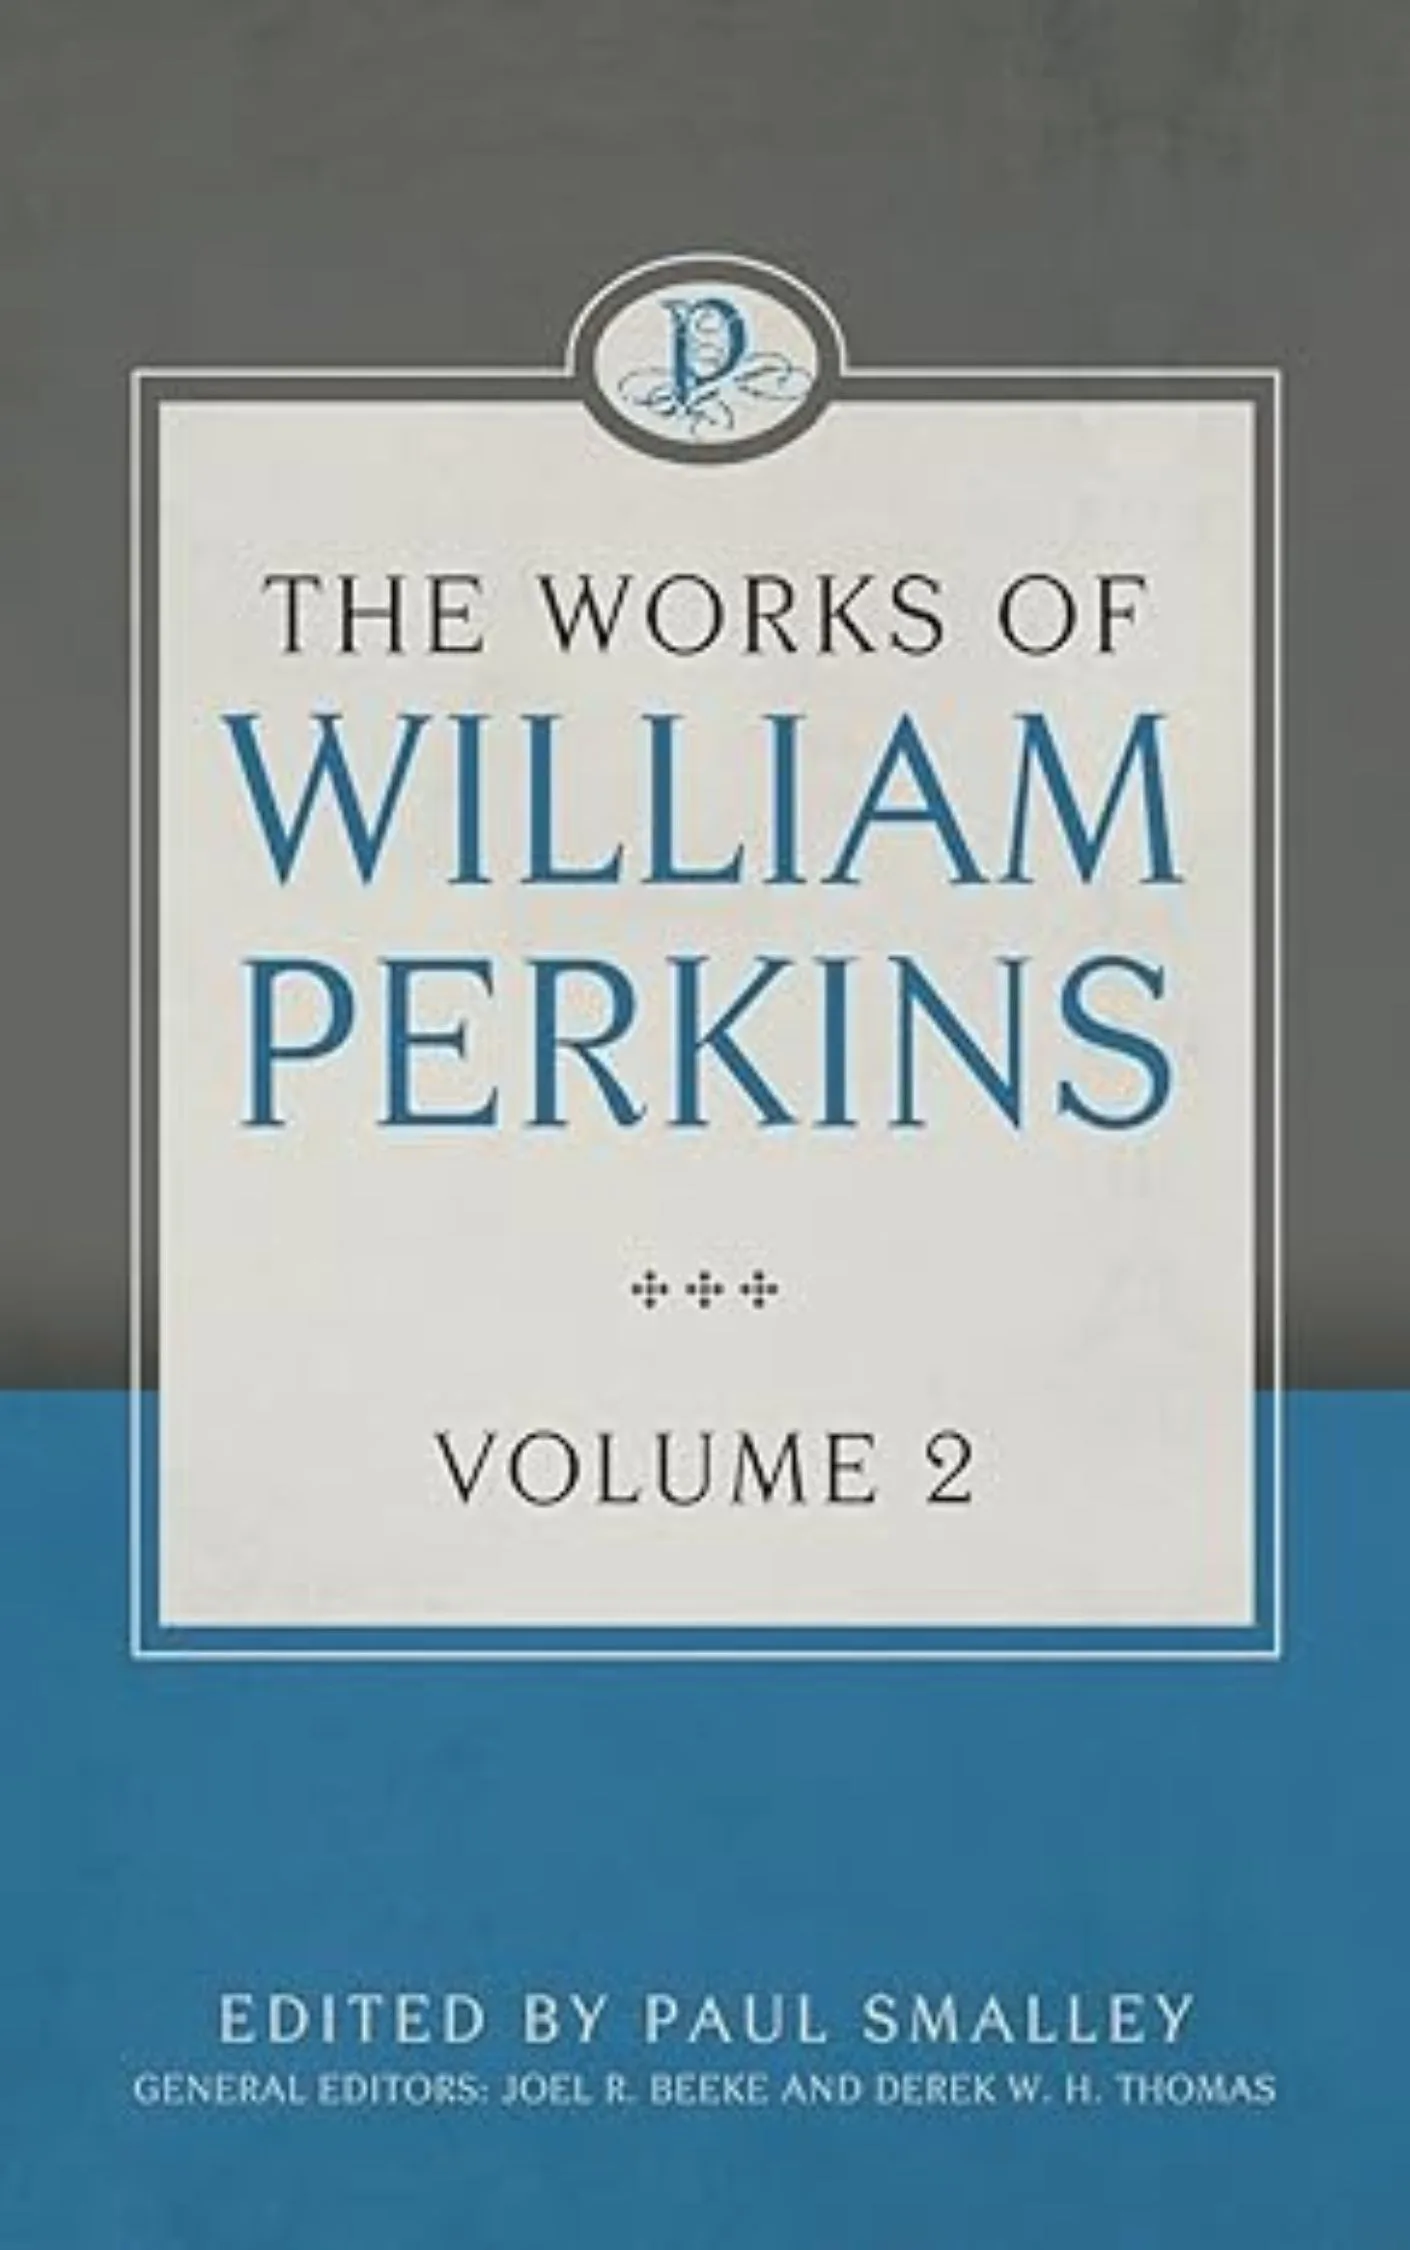 The Works of William Perkins: Volume 2 by William Perkins and Paul Smalley